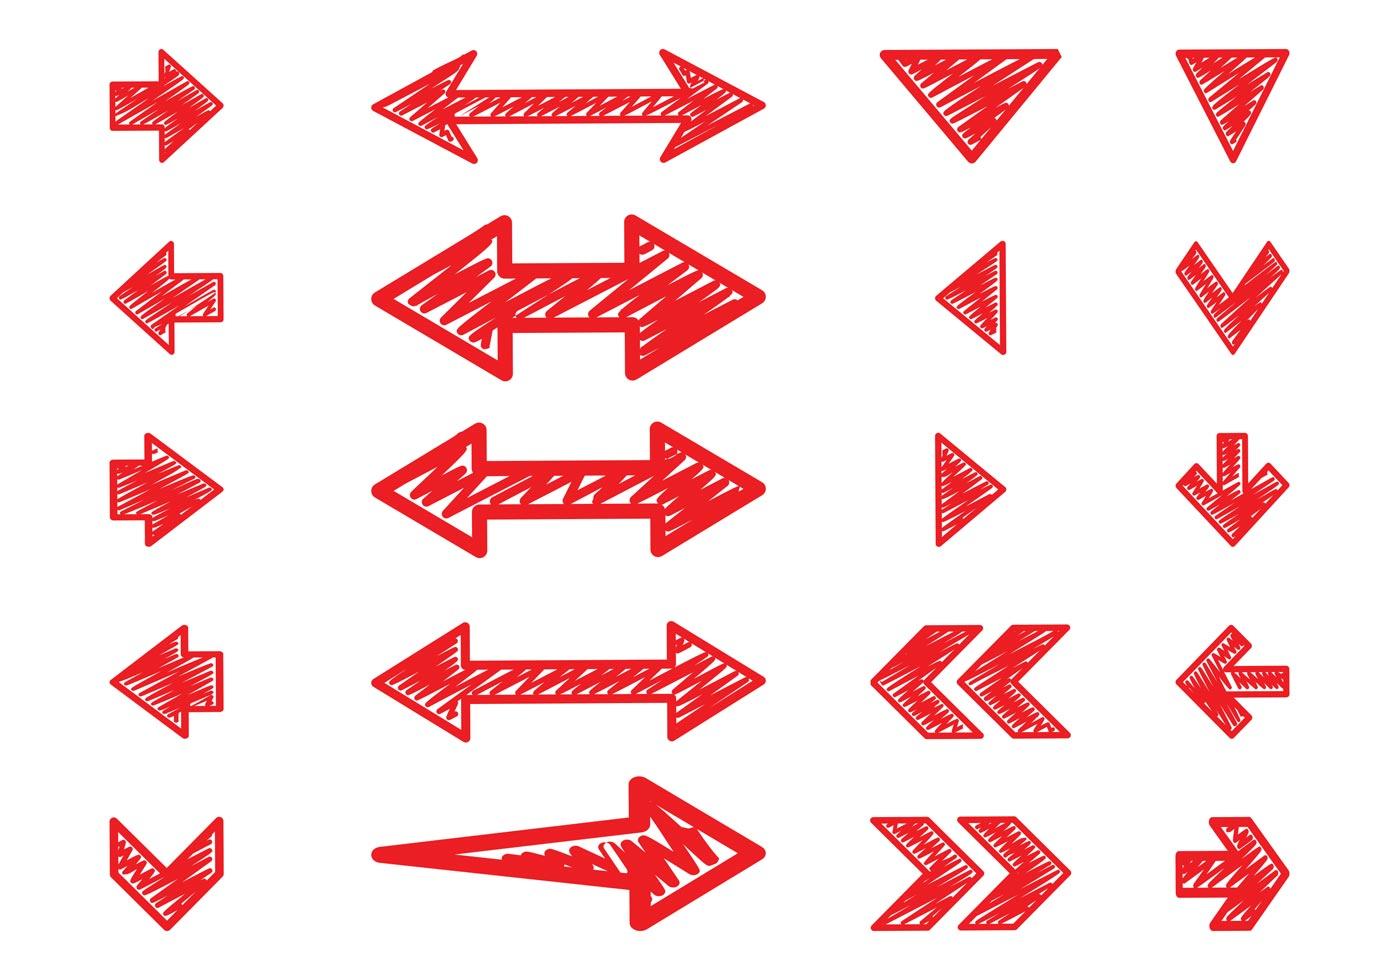 Hand Drawn Arrows Set - Download Free Vector Art, Stock Graphics & Images